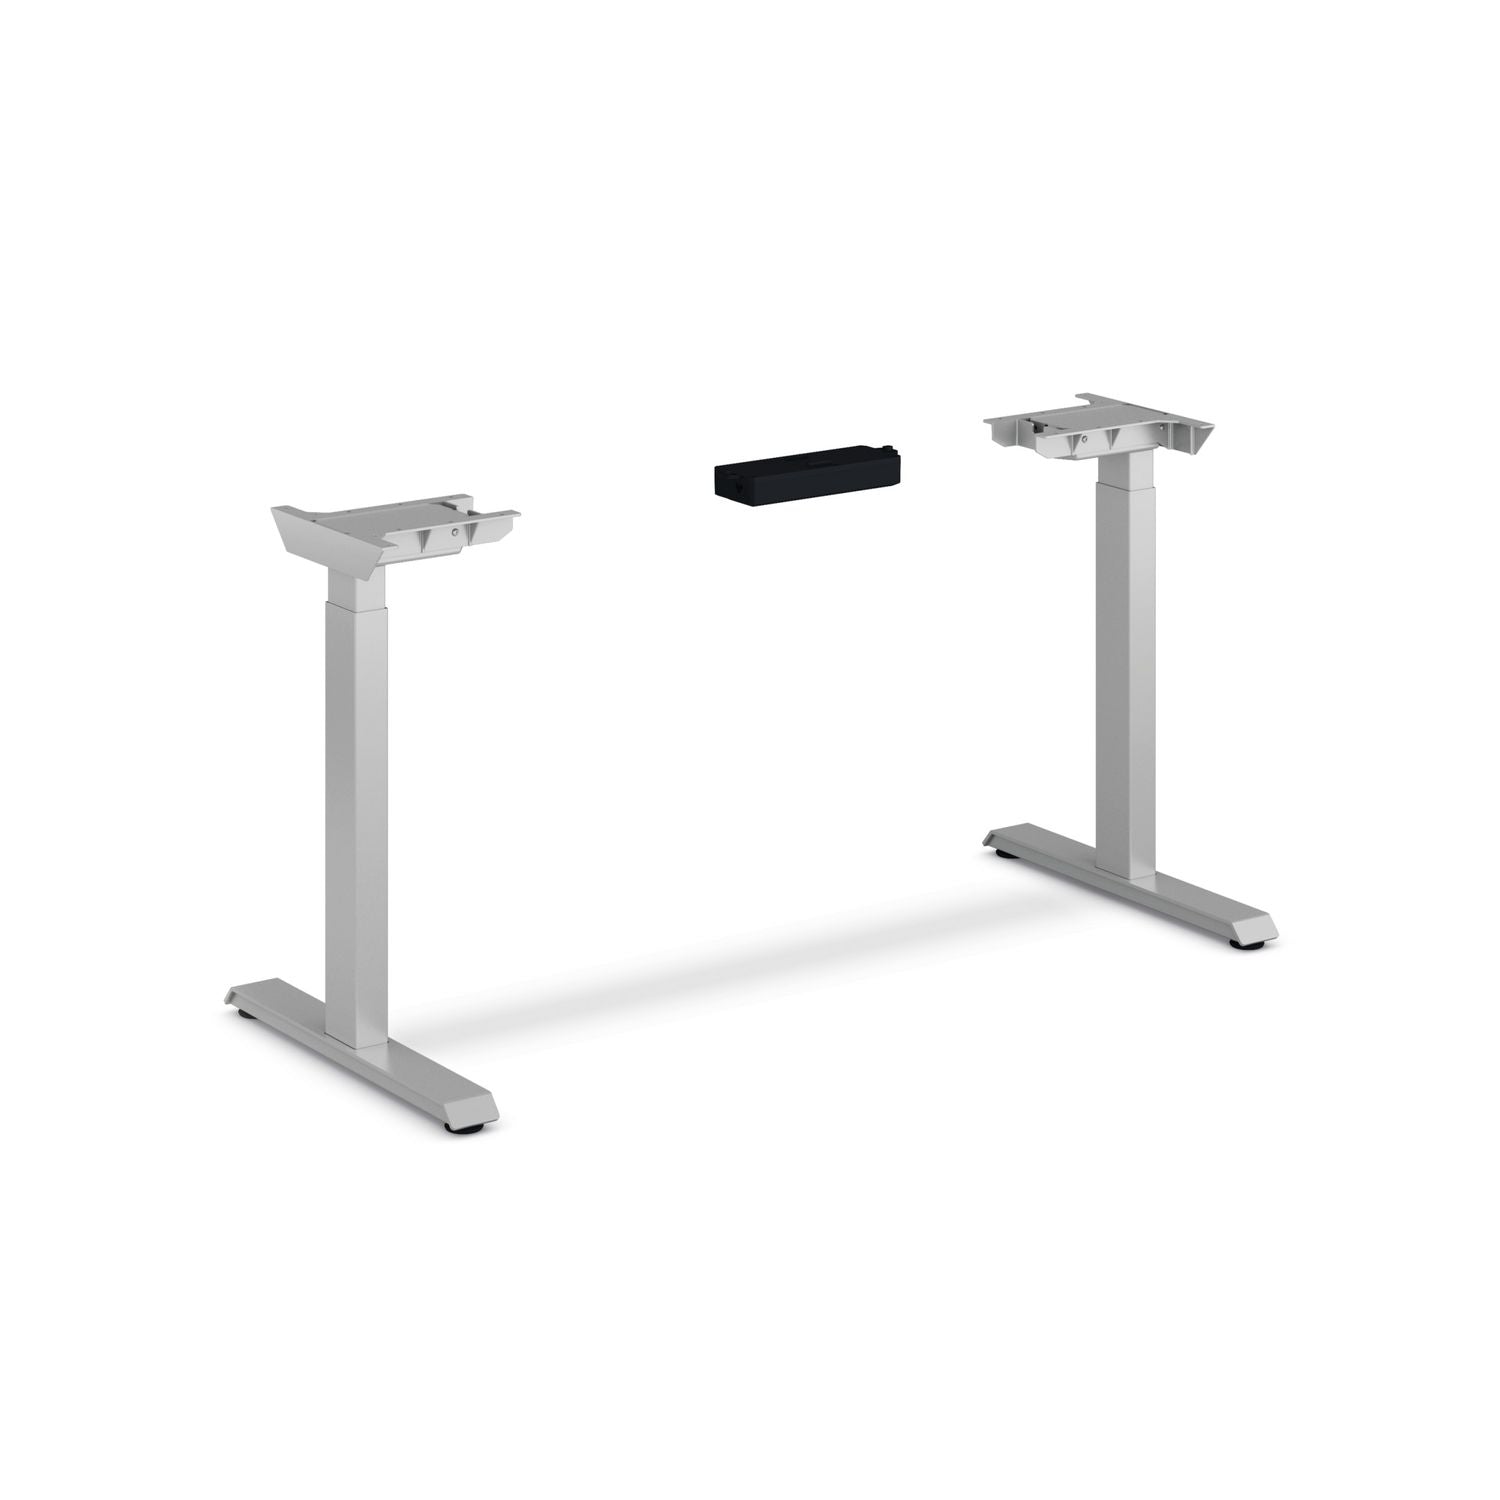 coordinate-height-adjustable-desk-bundle-2-stage-46-x-22-x-2775-to-47-pinnacle\\silver-ships-in-7-10-business-days_honhat2spns2246 - 3